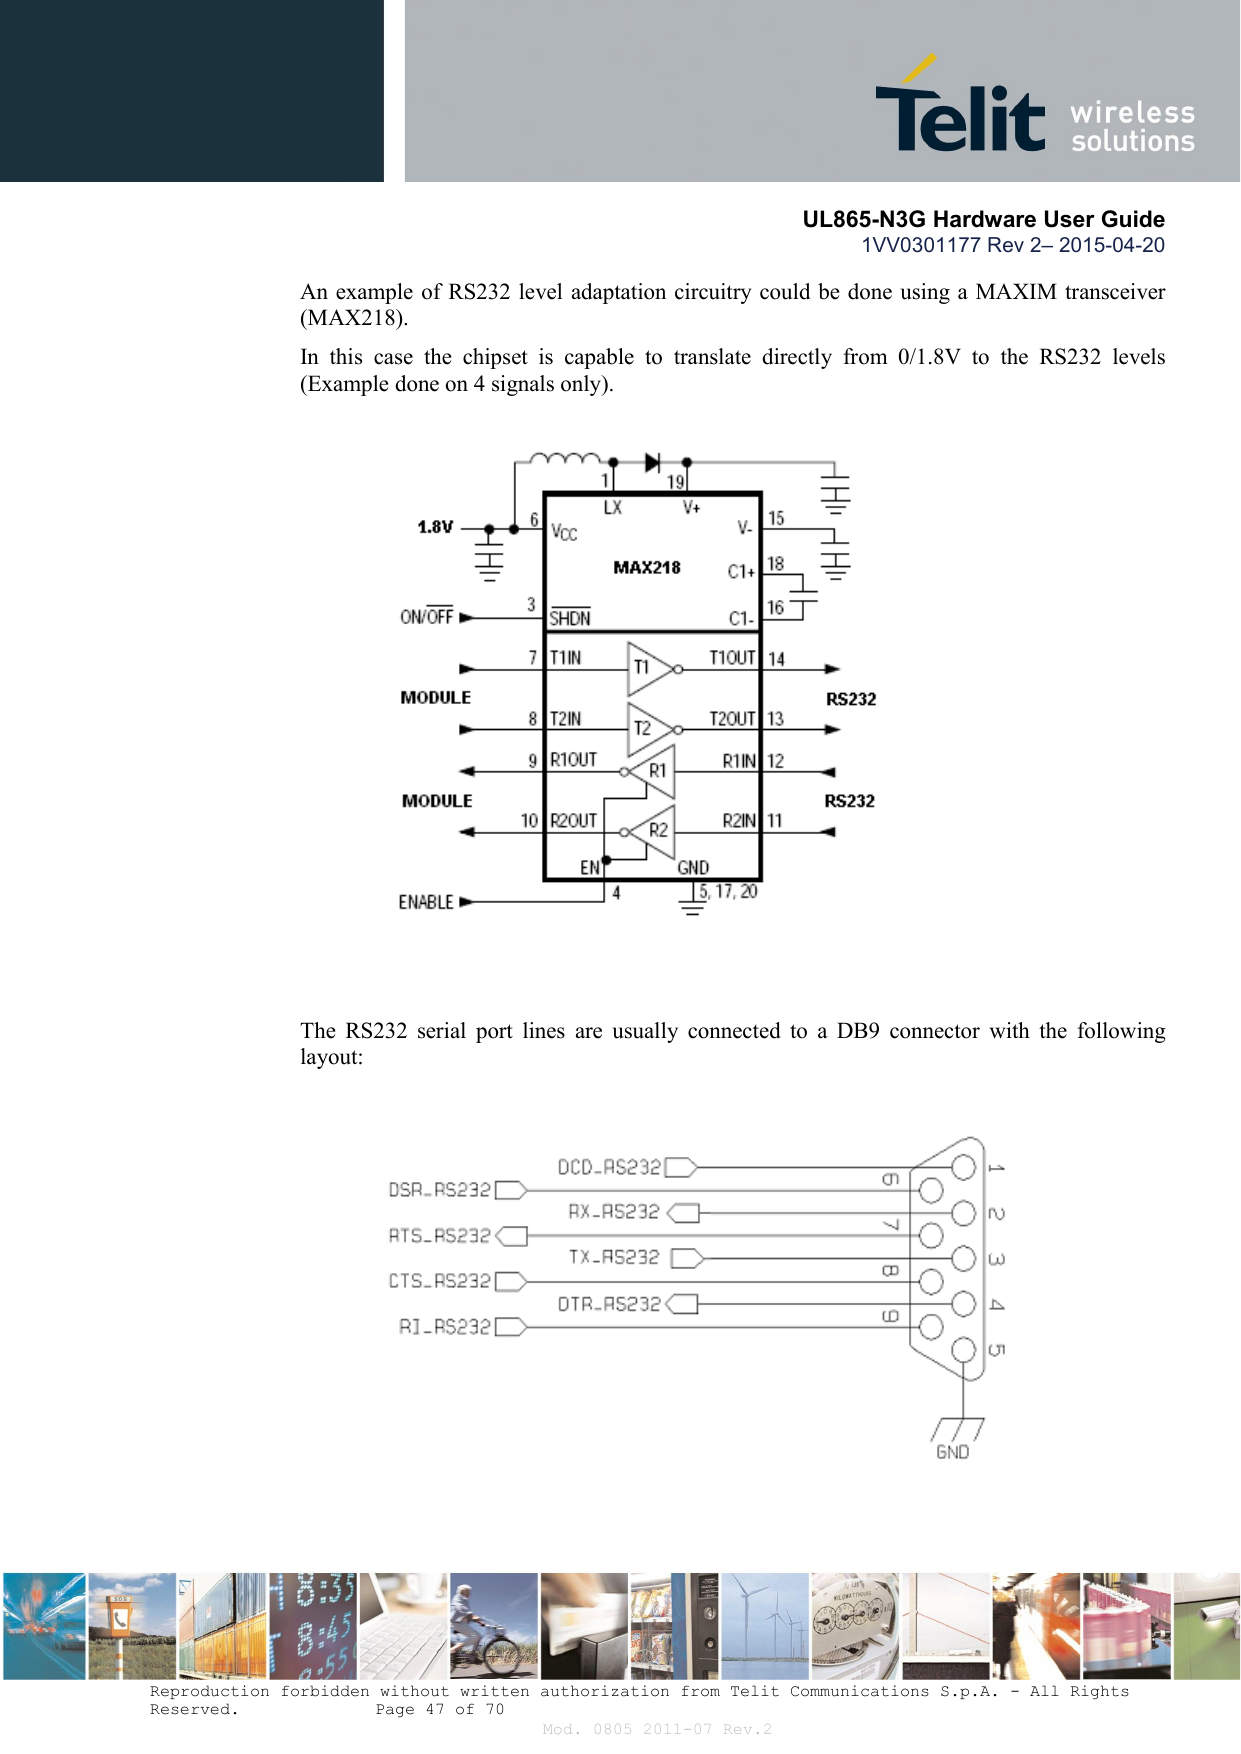       UL865-N3G Hardware User Guide 1VV0301177 Rev 2– 2015-04-20  Reproduction forbidden without written authorization from Telit Communications S.p.A. - All Rights Reserved.    Page 47 of 70 Mod. 0805 2011-07 Rev.2 An example of RS232 level adaptation circuitry could be done using a MAXIM transceiver (MAX218).  In  this  case  the  chipset  is  capable  to  translate  directly  from  0/1.8V  to  the  RS232  levels (Example done on 4 signals only).      The  RS232  serial  port  lines  are  usually  connected  to  a  DB9  connector  with  the  following layout:     